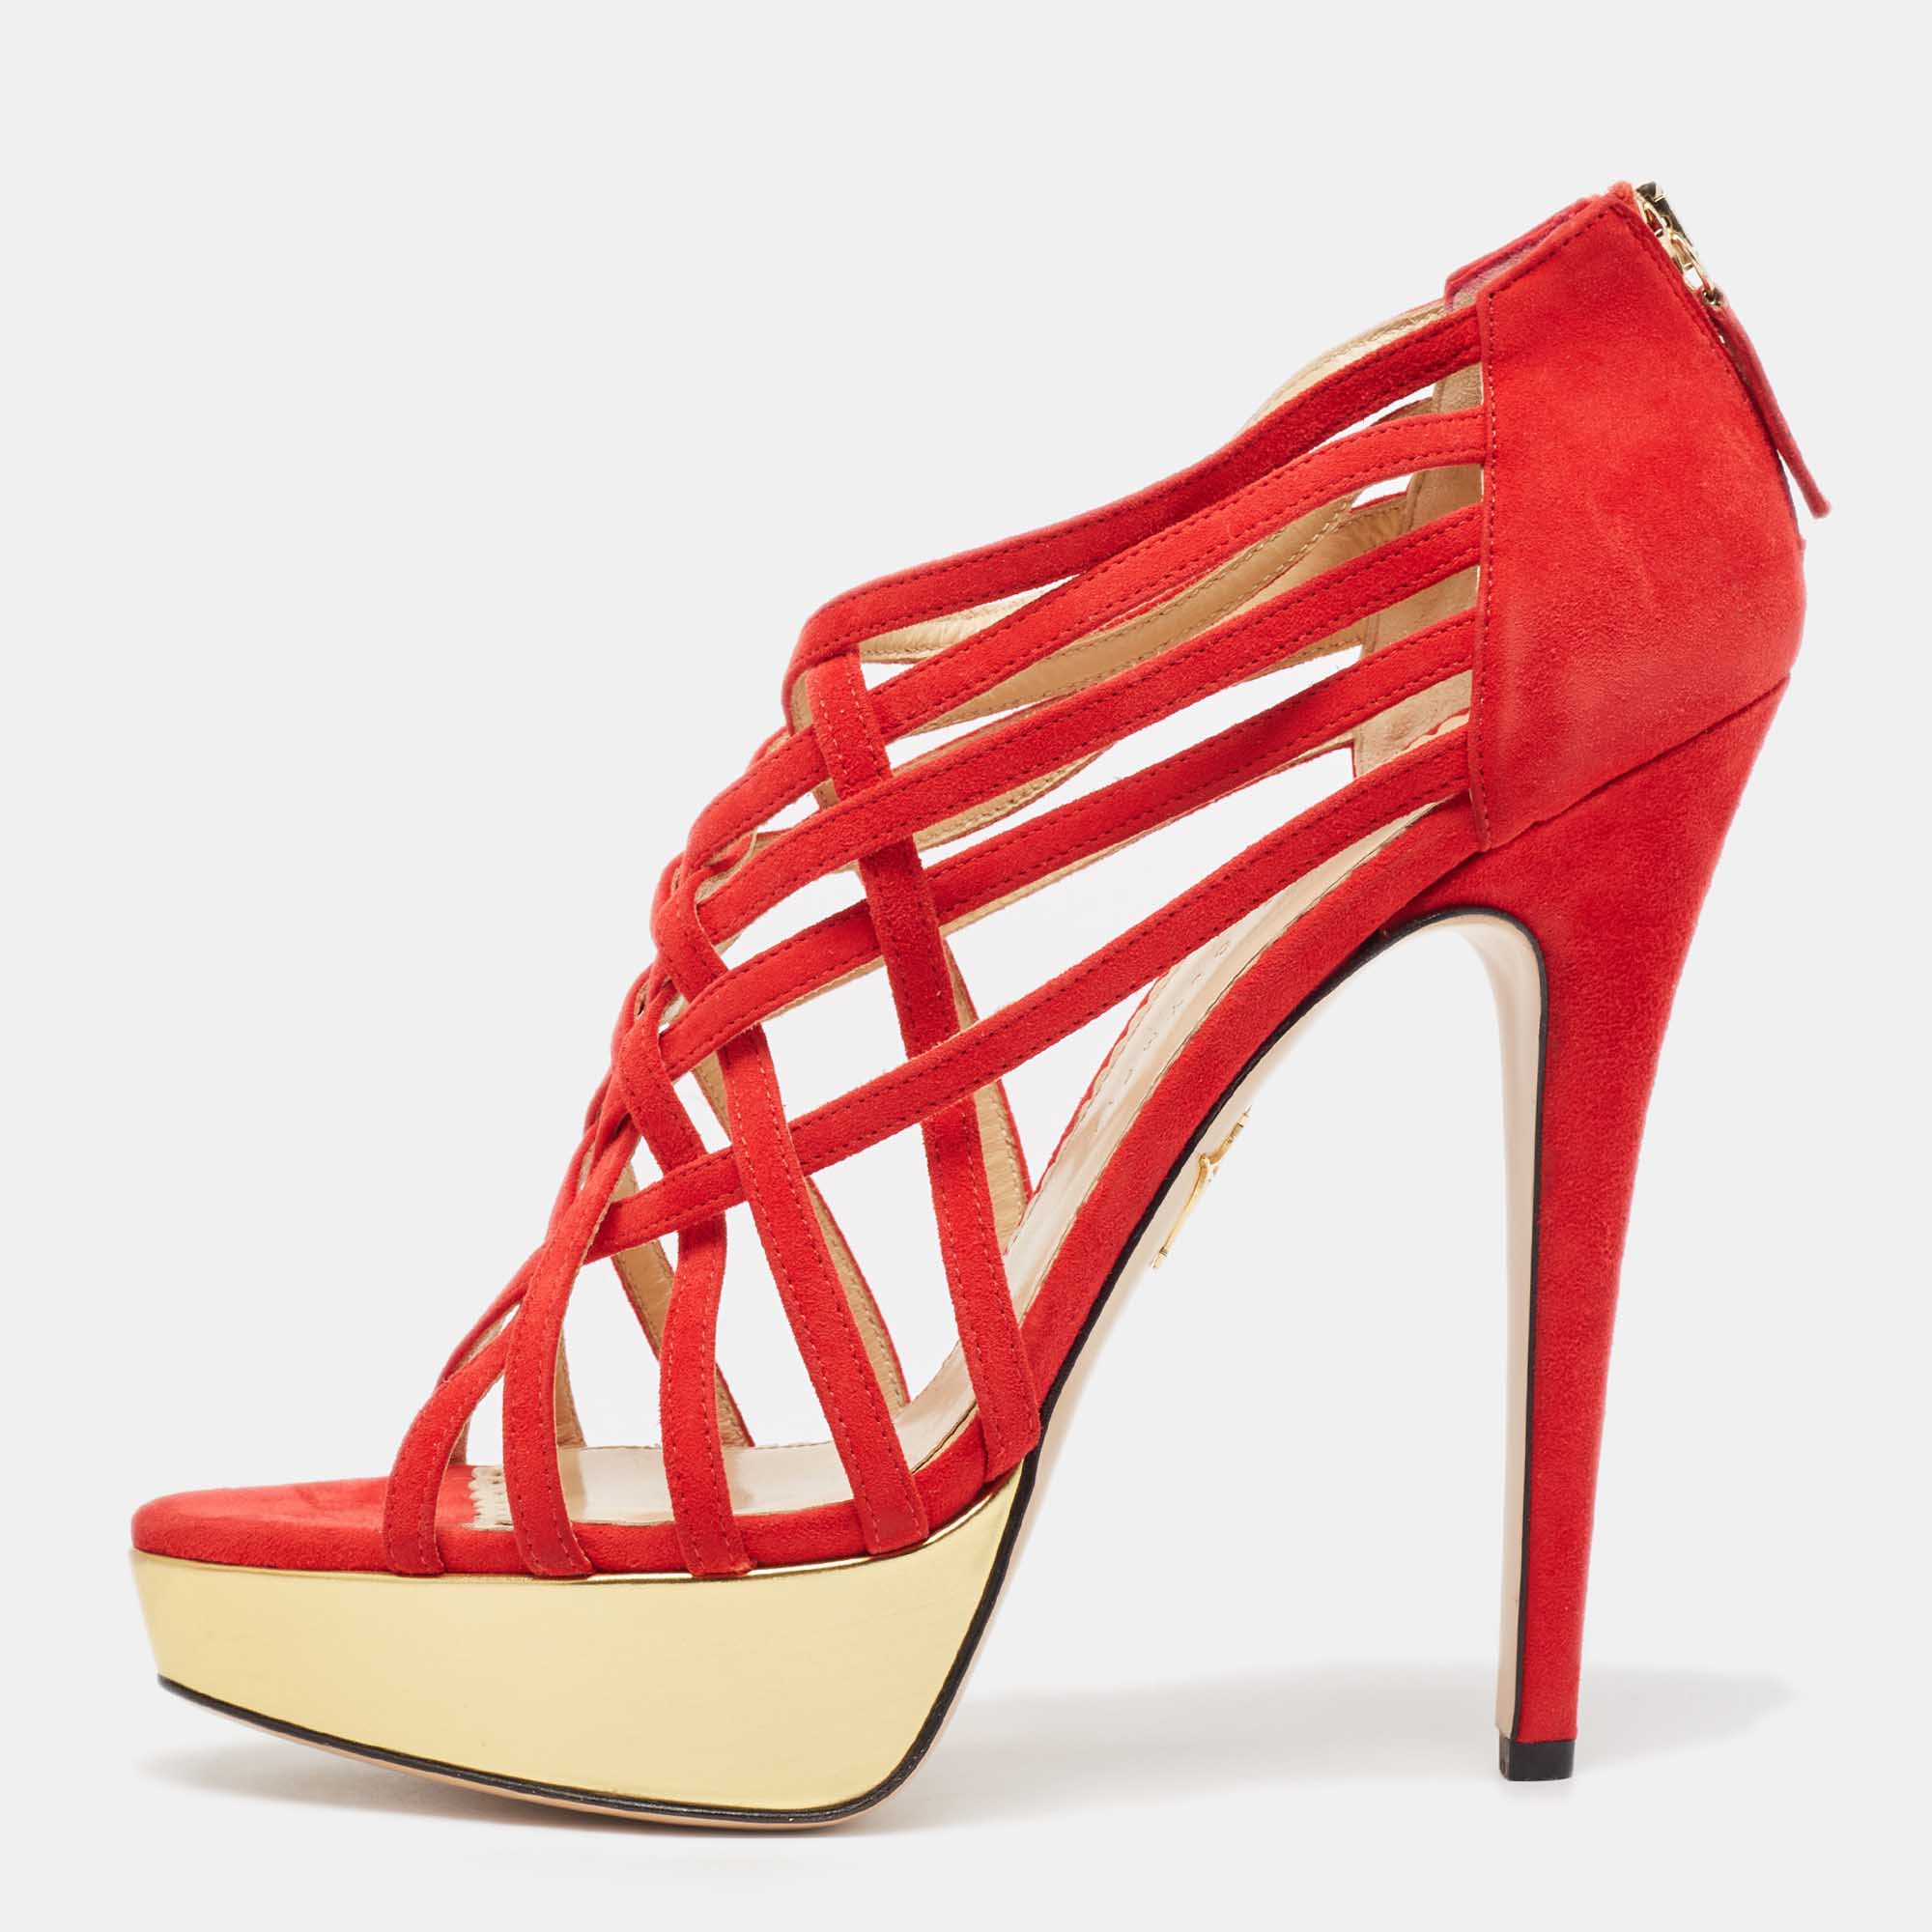 Charlotte olympia red suede strappy platform pumps size 40